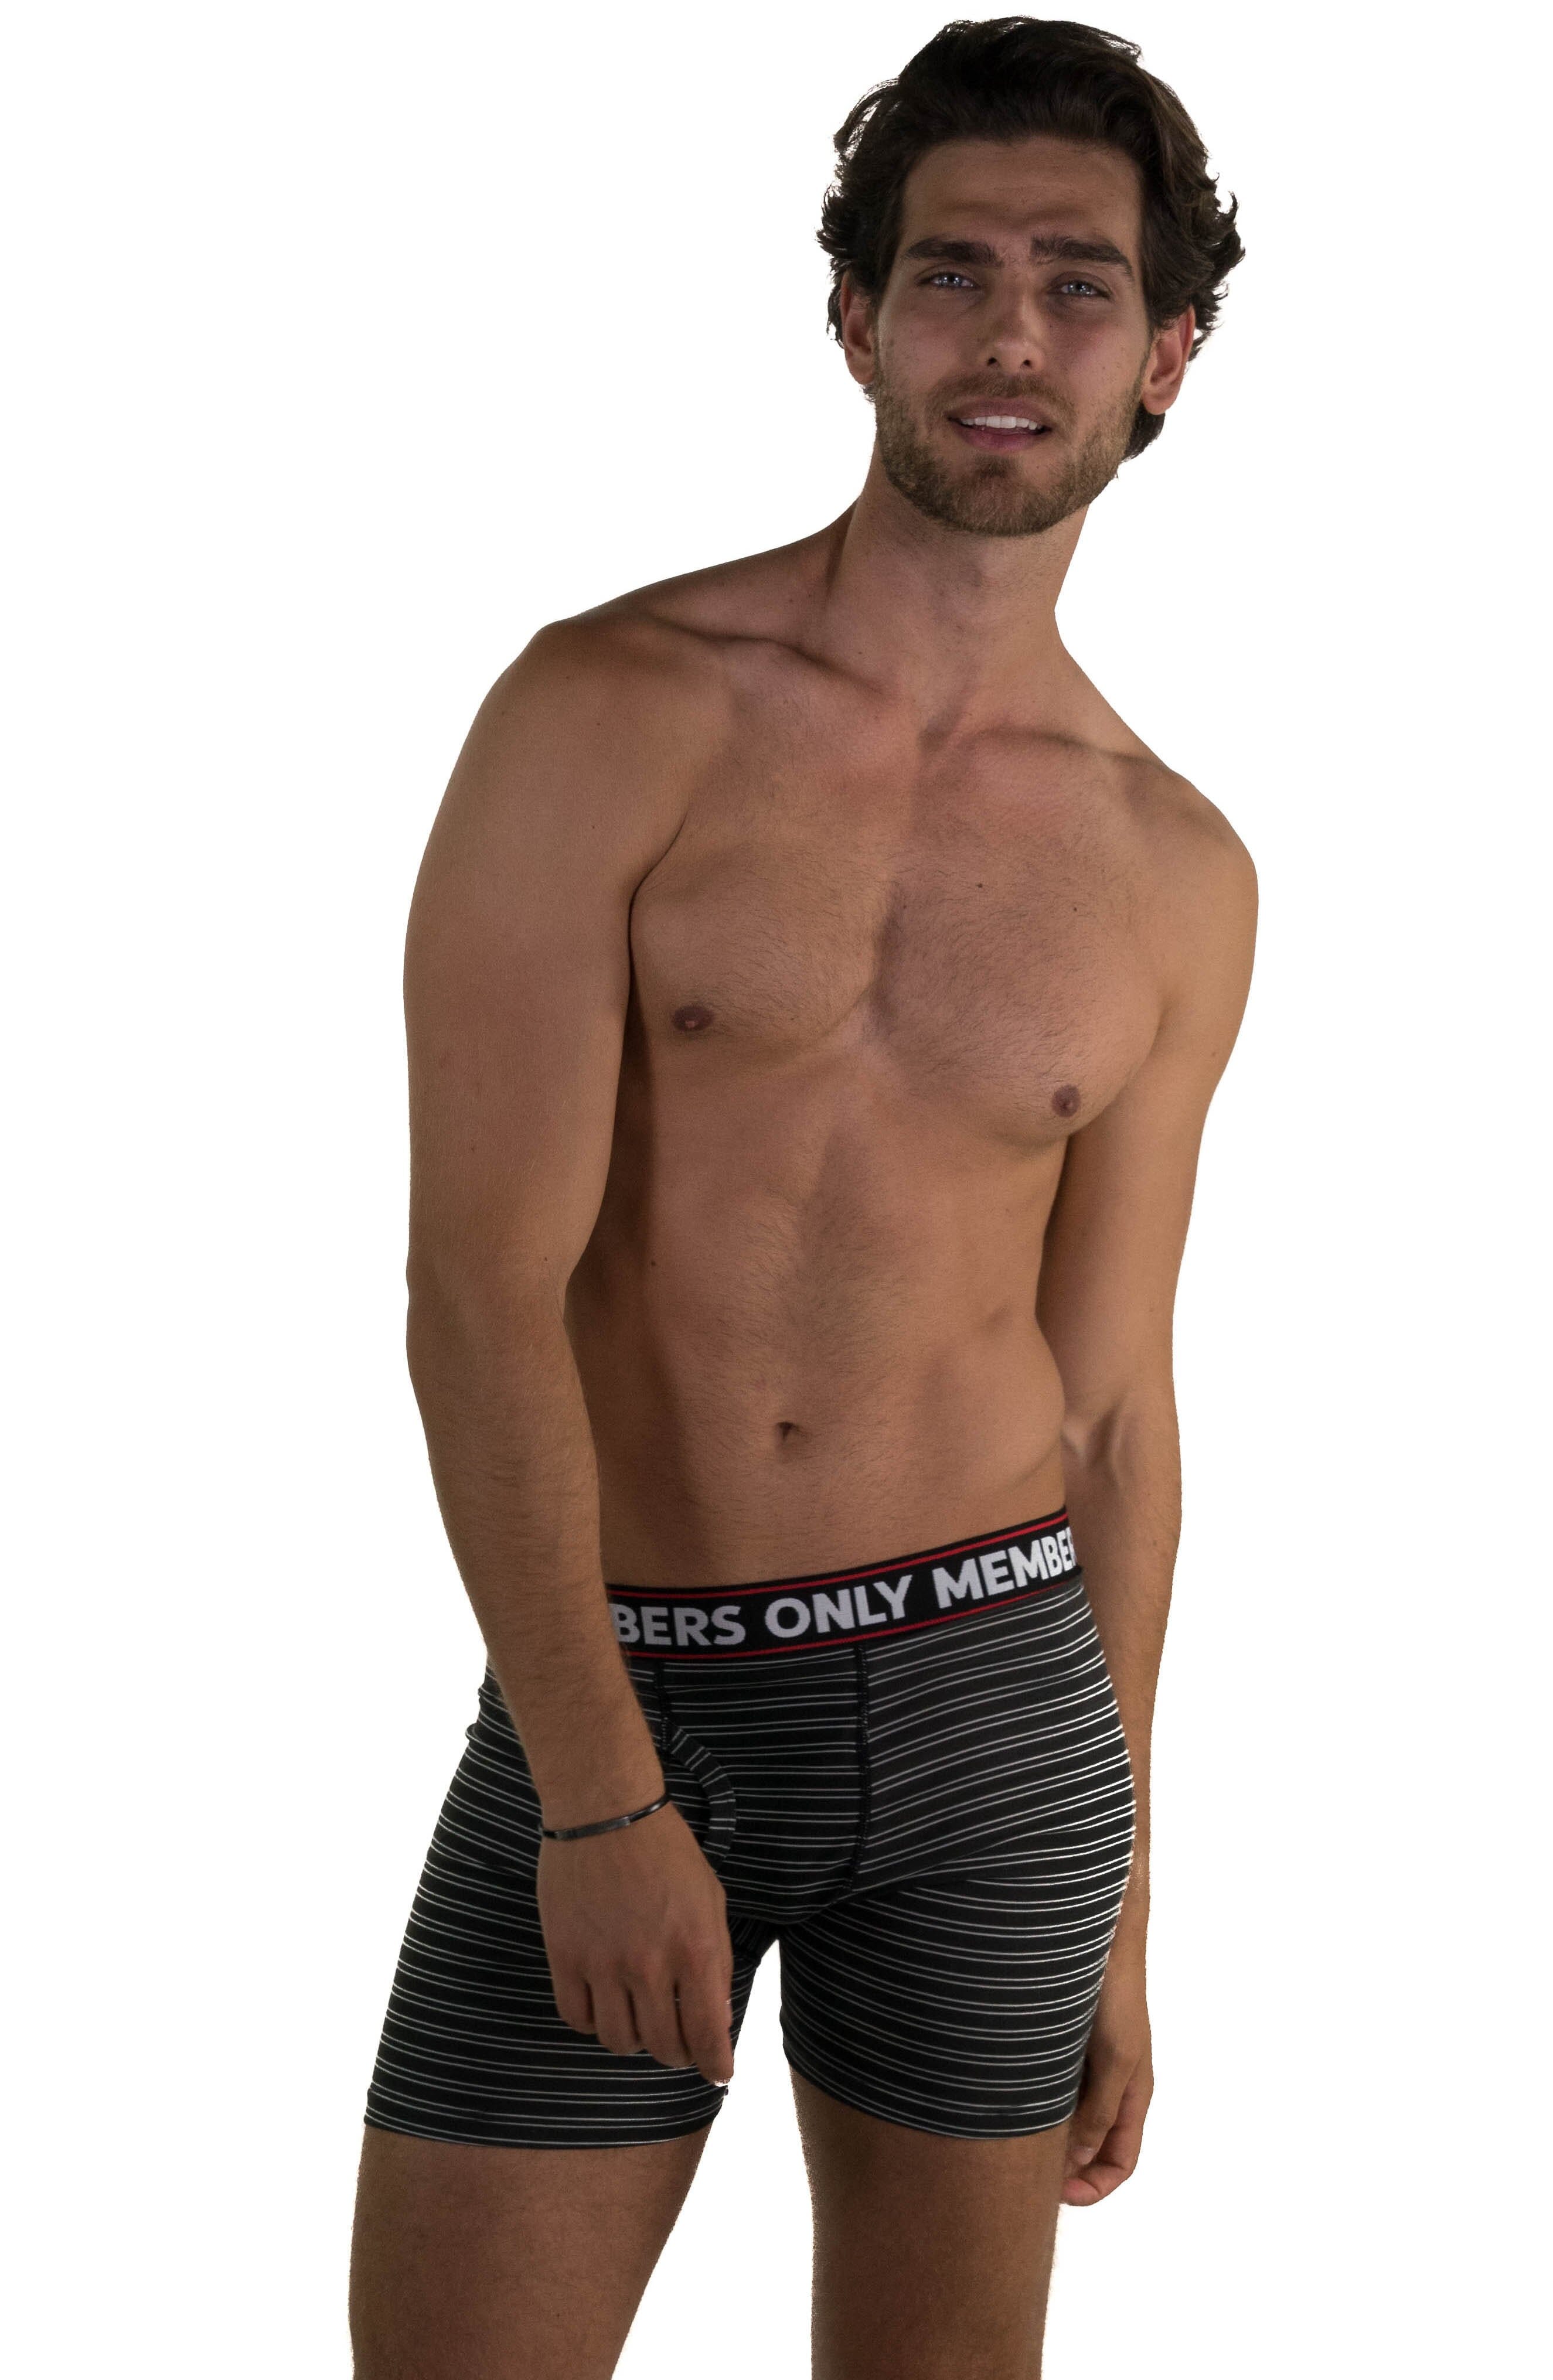 Members Only Briefs and Underwear For Men